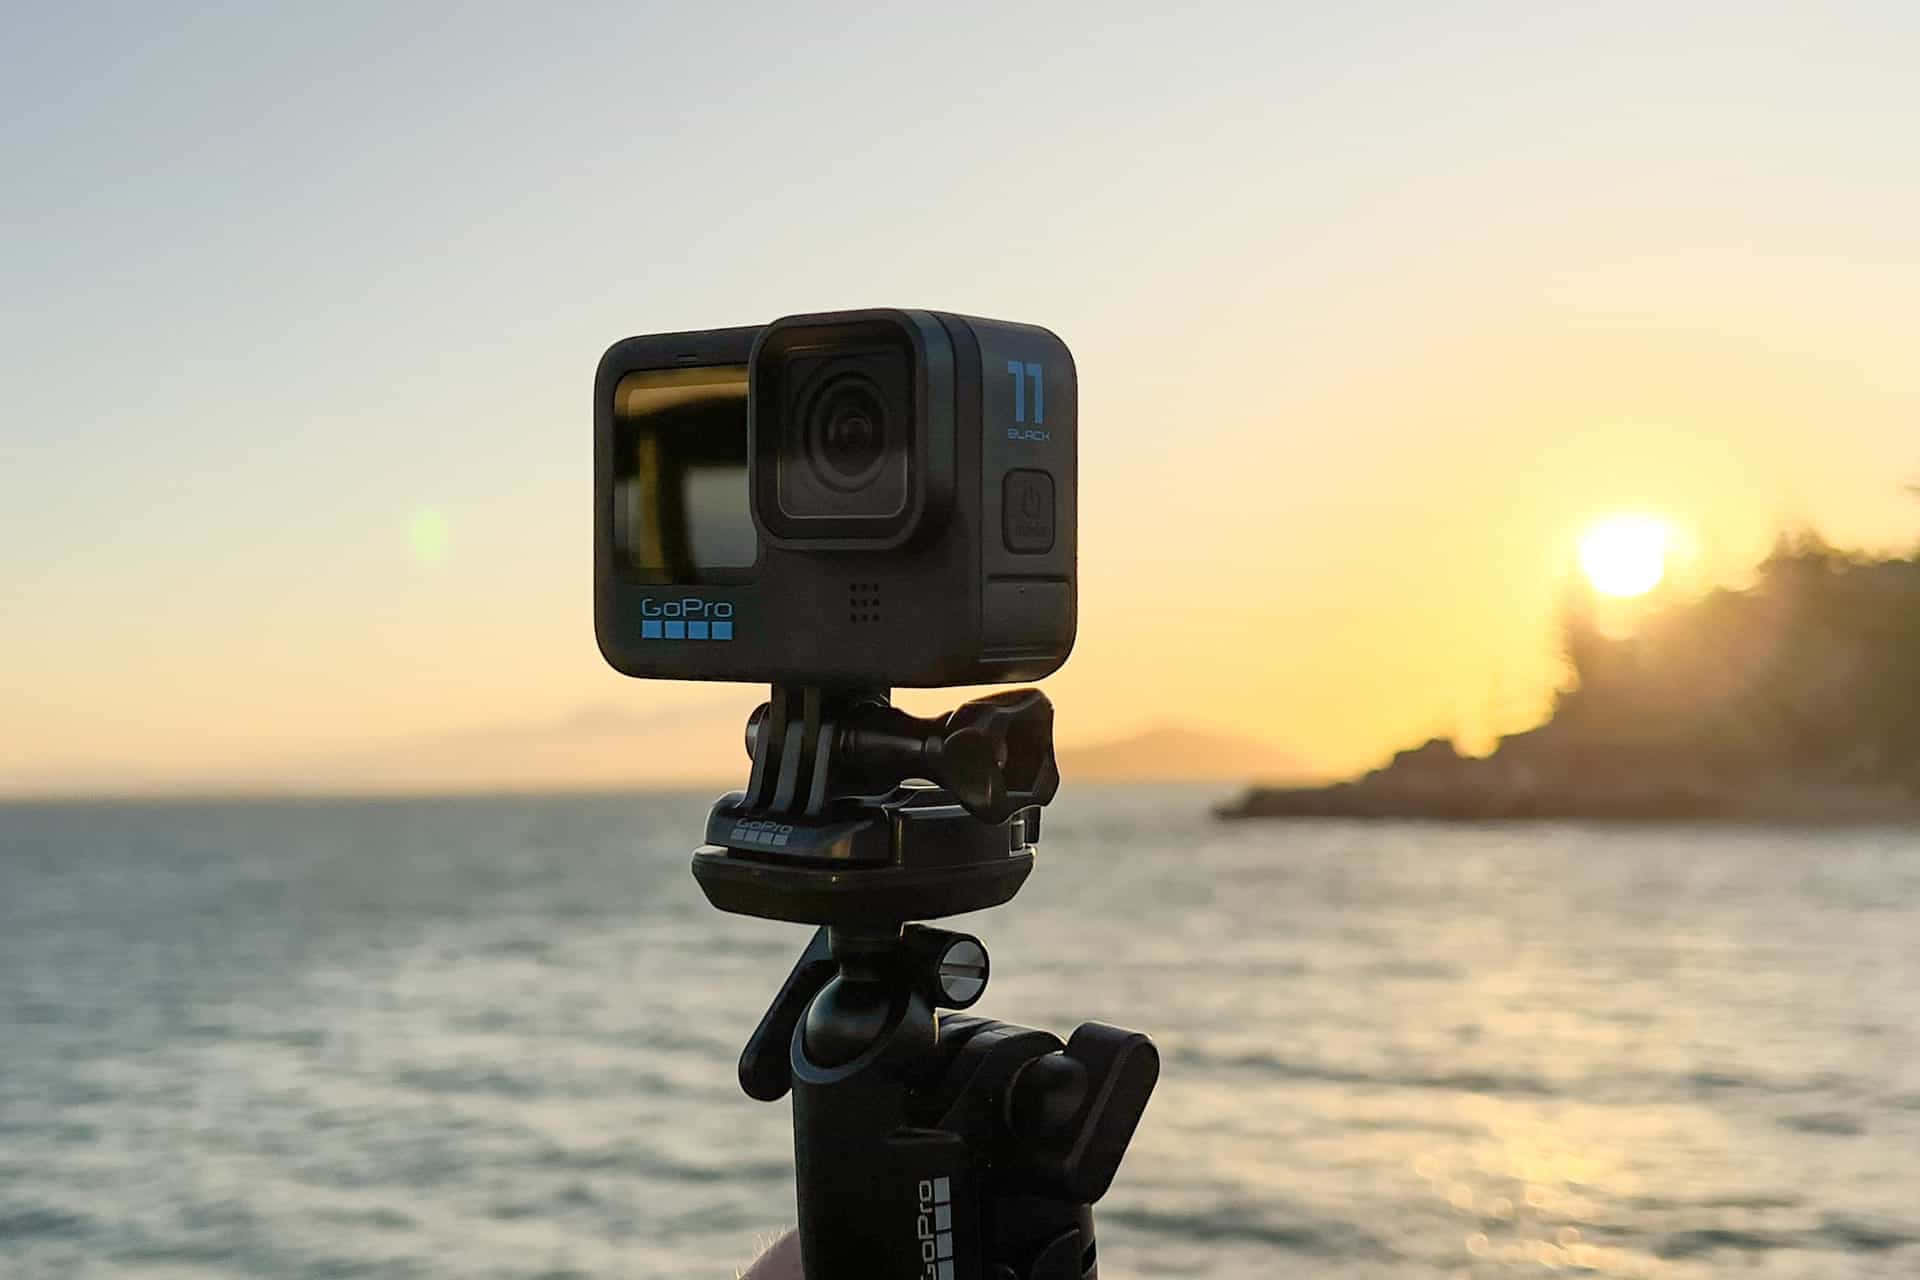 Capture your wildest adventures with the help of GoPro